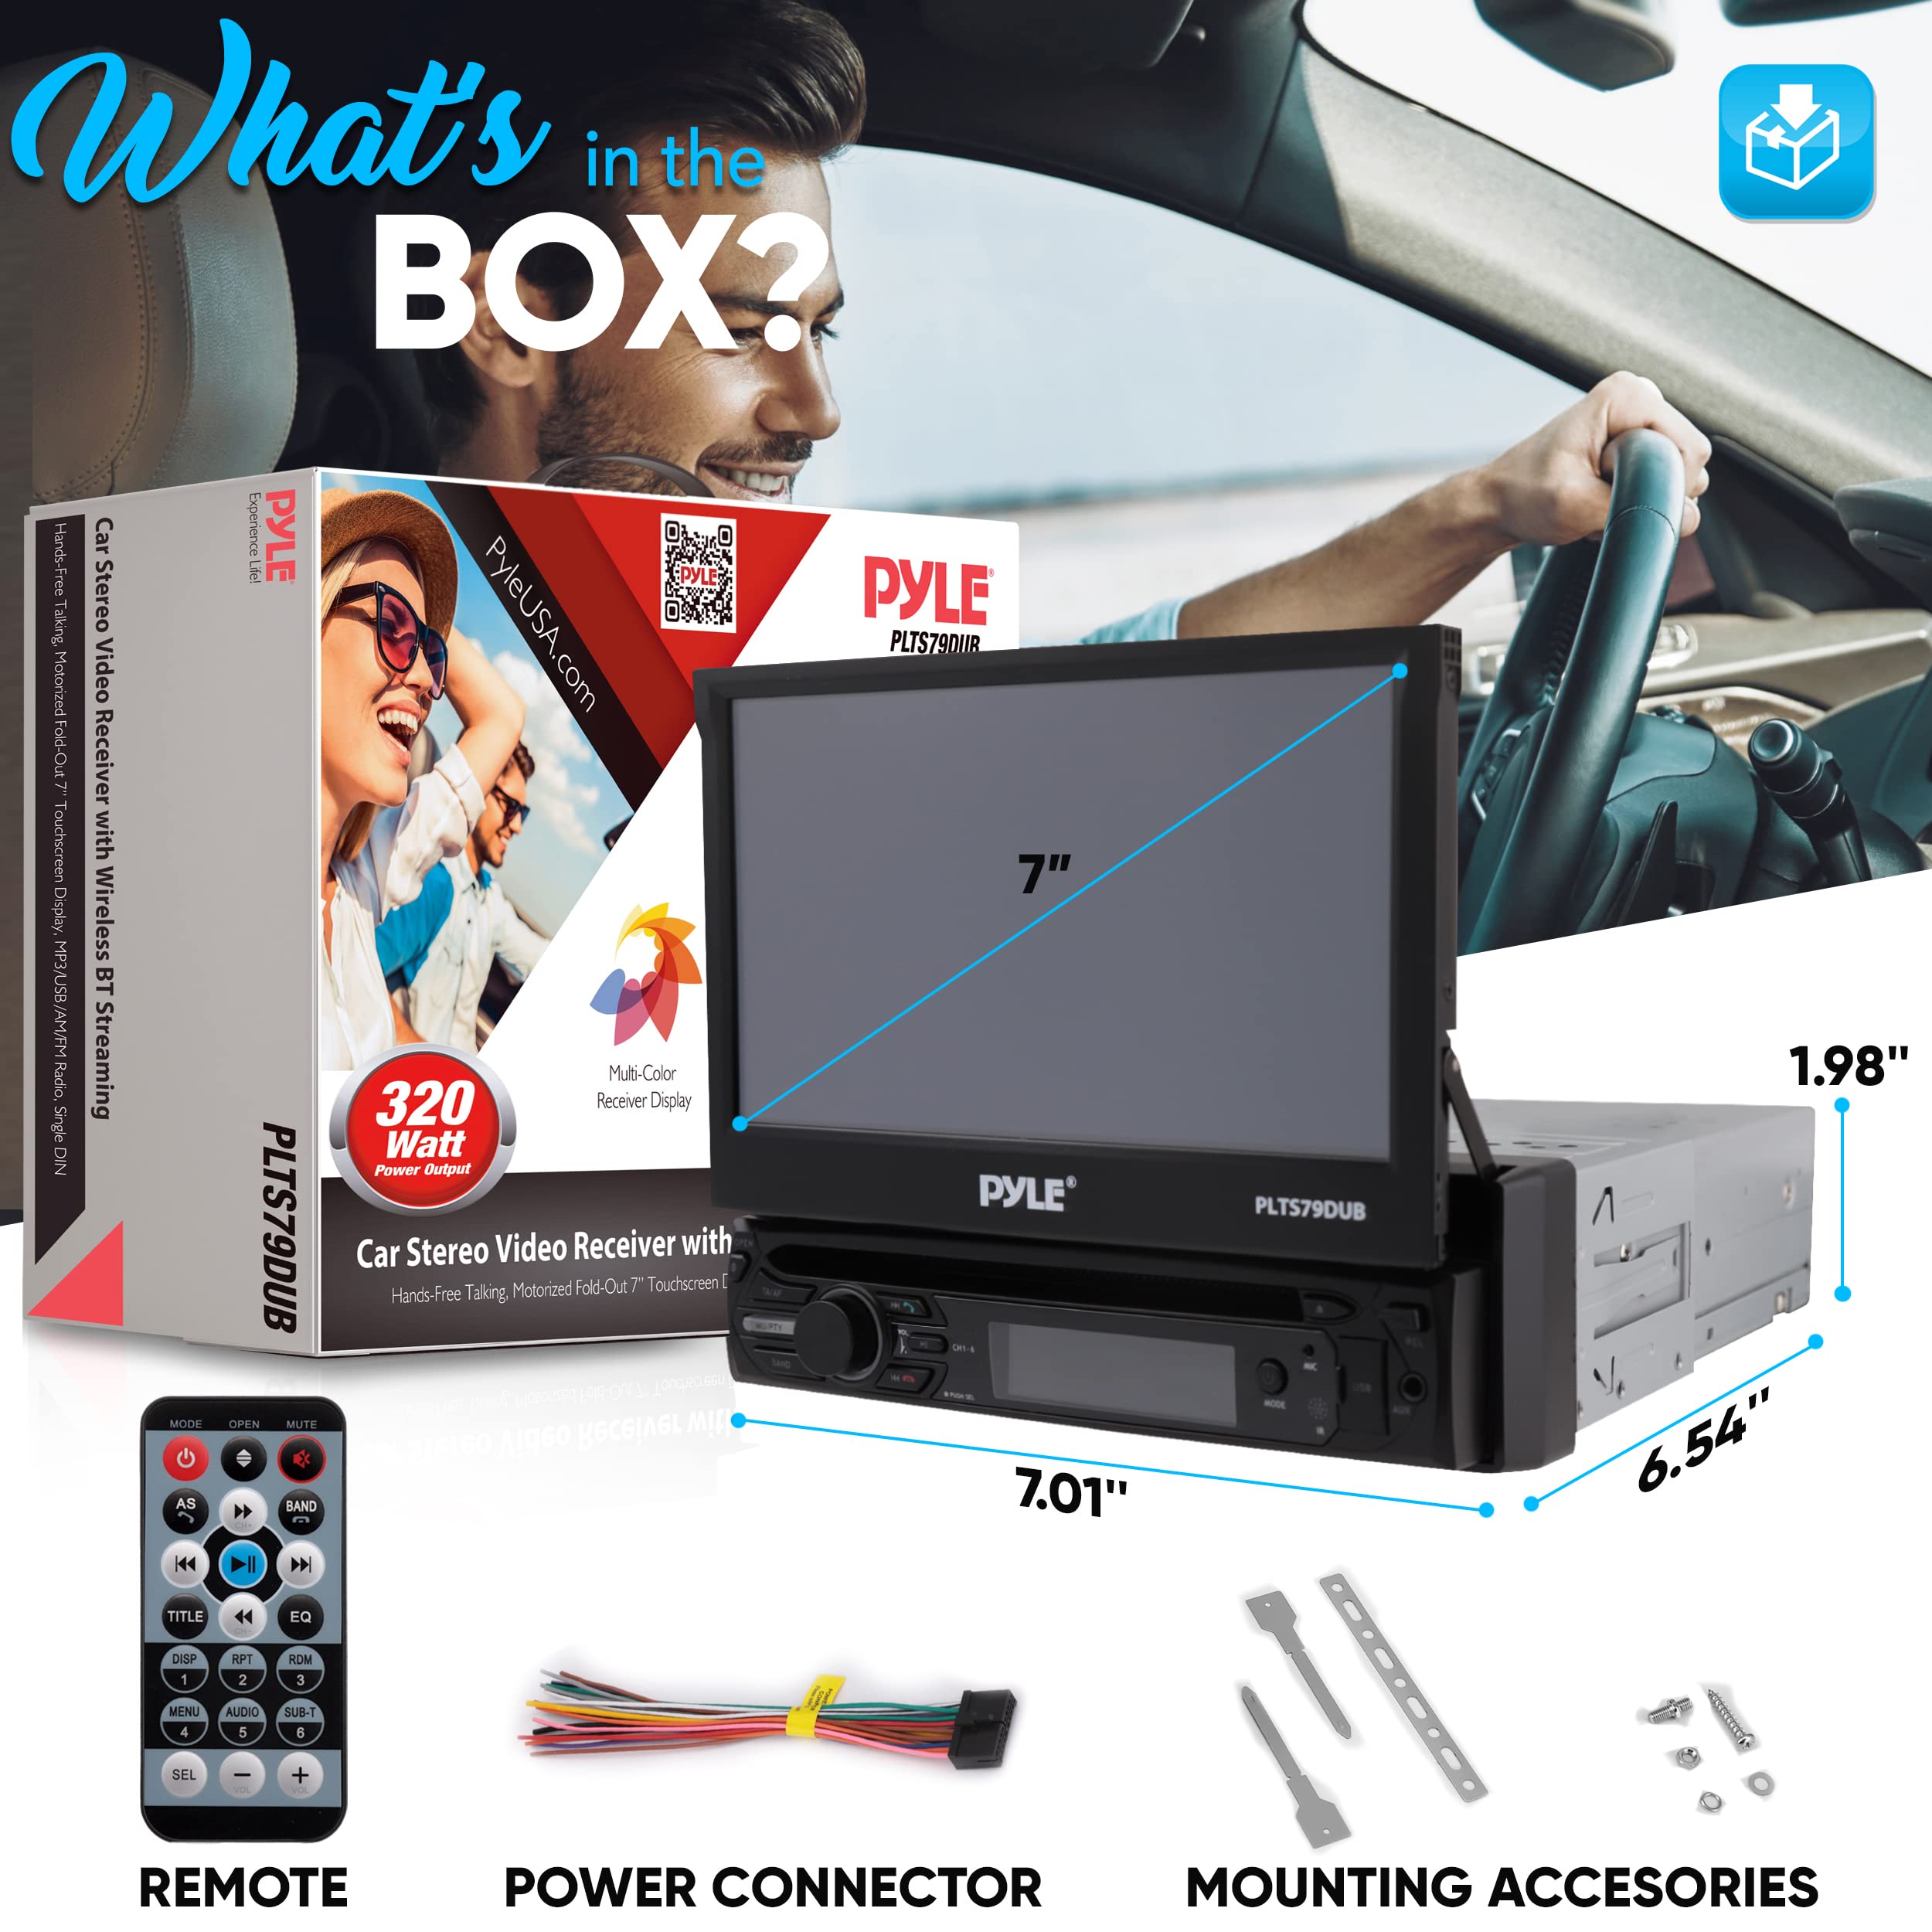 Car Stereo Video Receiver - Multimedia Disc Player, BT Wireless Streaming, Hands-Free Talking, Motorized Fold-Out 7” Touchscreen Display, Multimedia MP4/MP3/USB/AM/FM Radio, Single DIN - PLTS79DUB